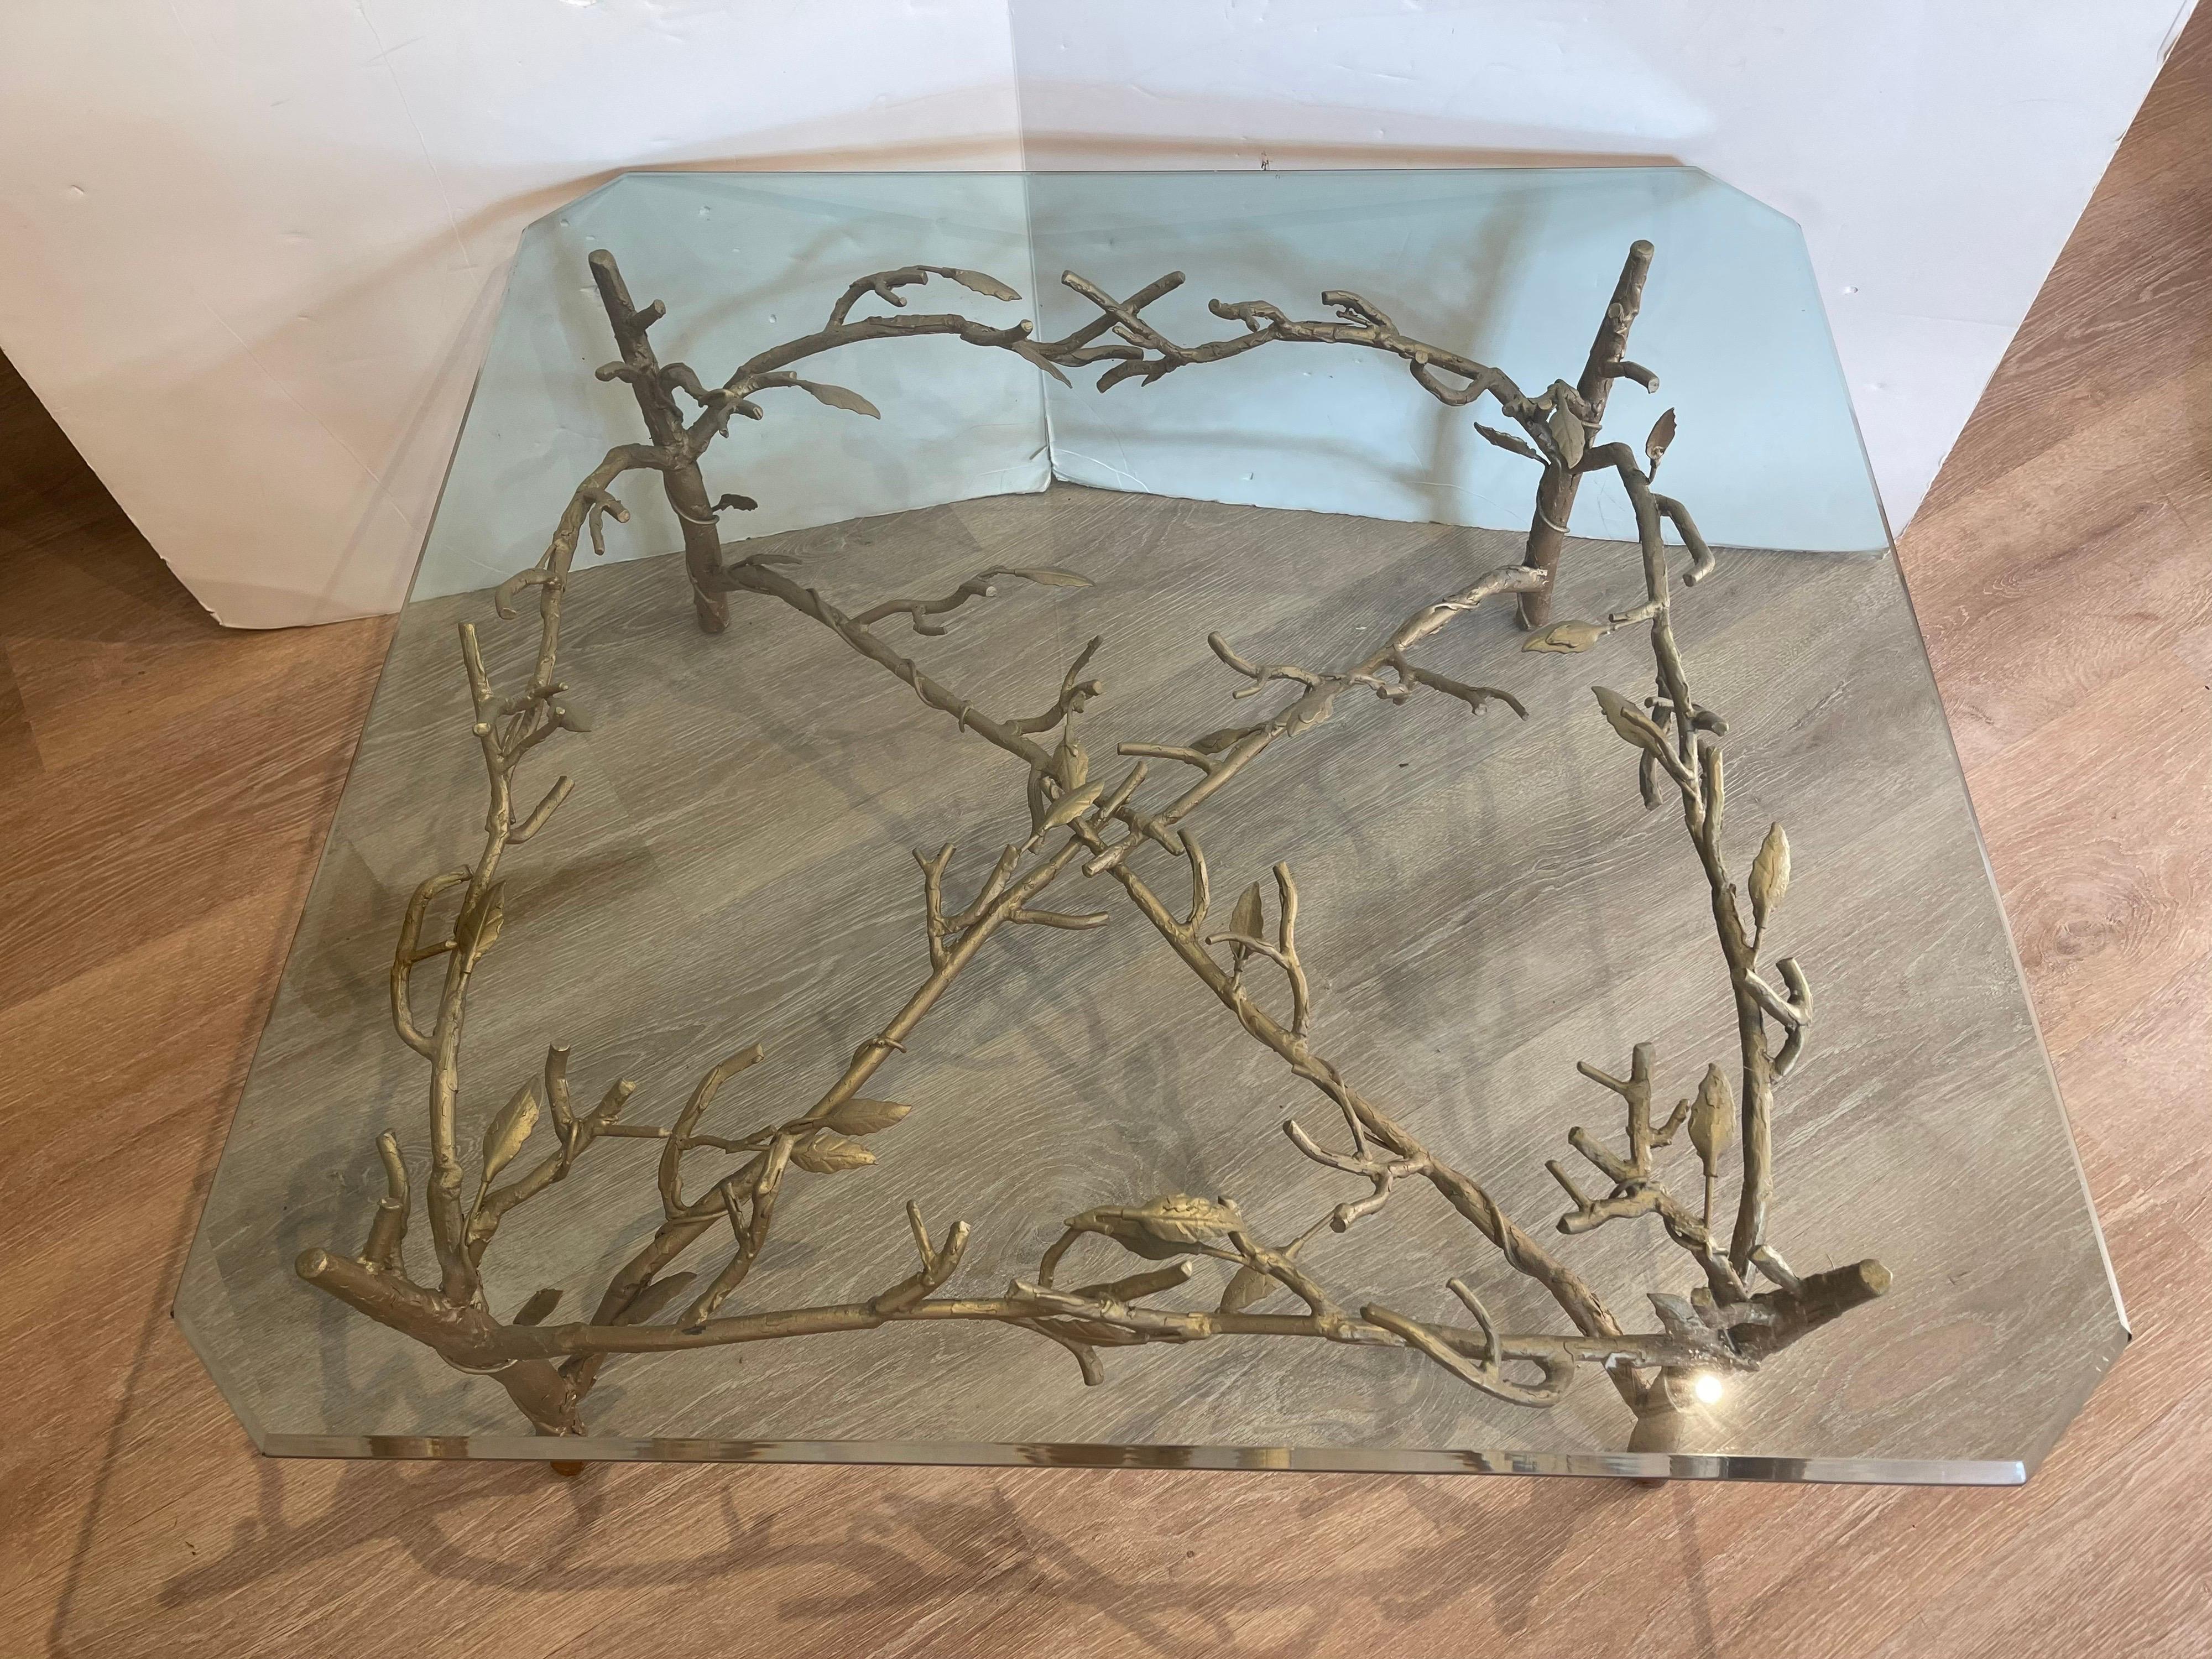 Elegant handmade wrought iron with glass top Alberto Giacometti style glass top cocktail / coffee
table. Features carved tree branches under glass. Great scale and better lines. Now, more than ever,
home is where the heart is.